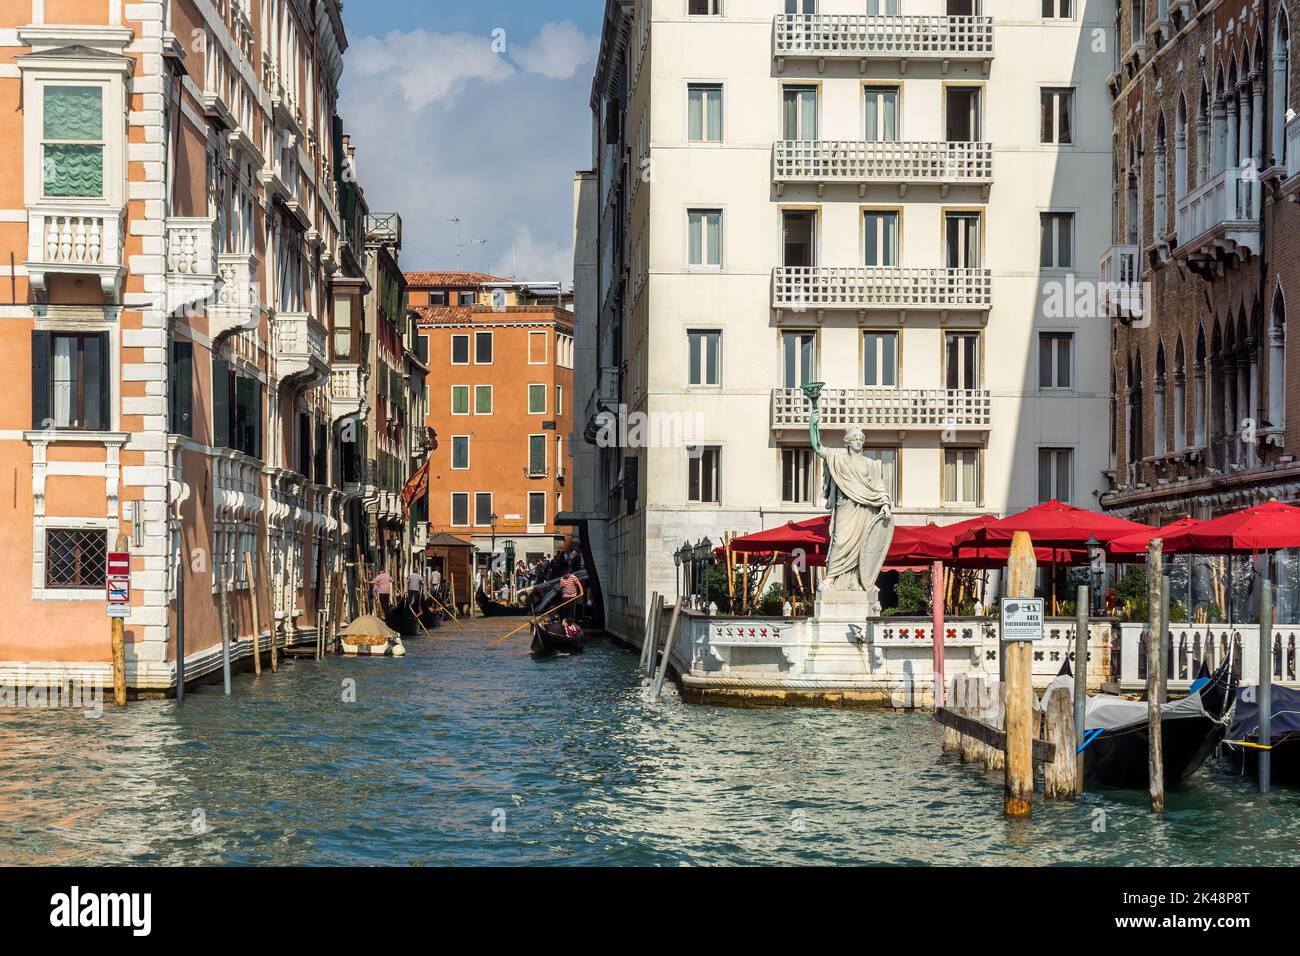 VENICE, ITALY - OCTOBER 12 : Typical canal scene in Venice on October 12, 2014. Unidentified people Stock Photo